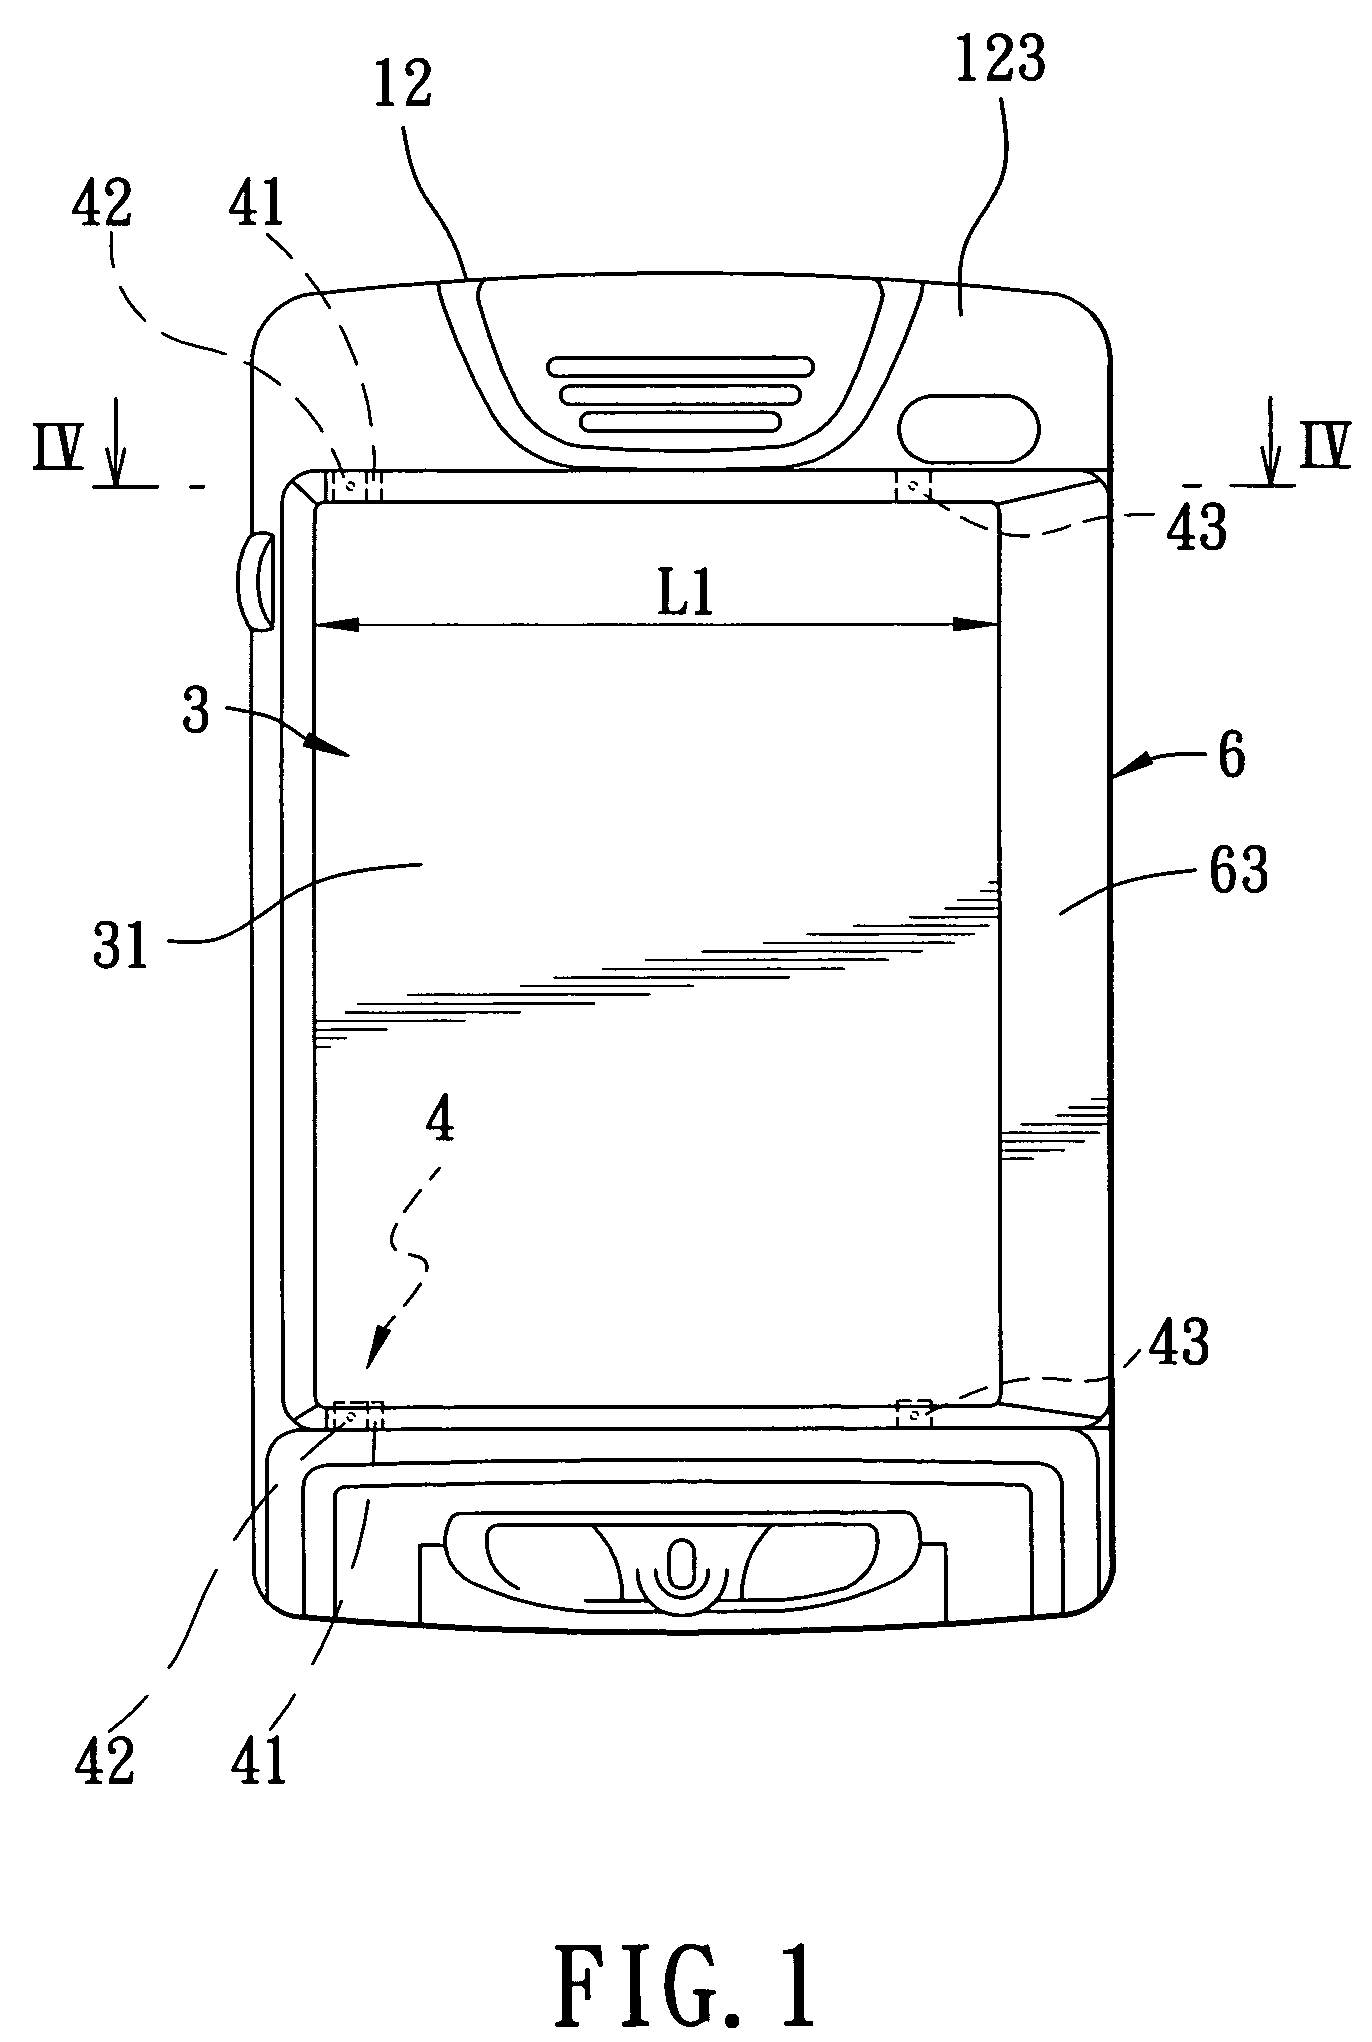 Electronic device having an adjustable display area